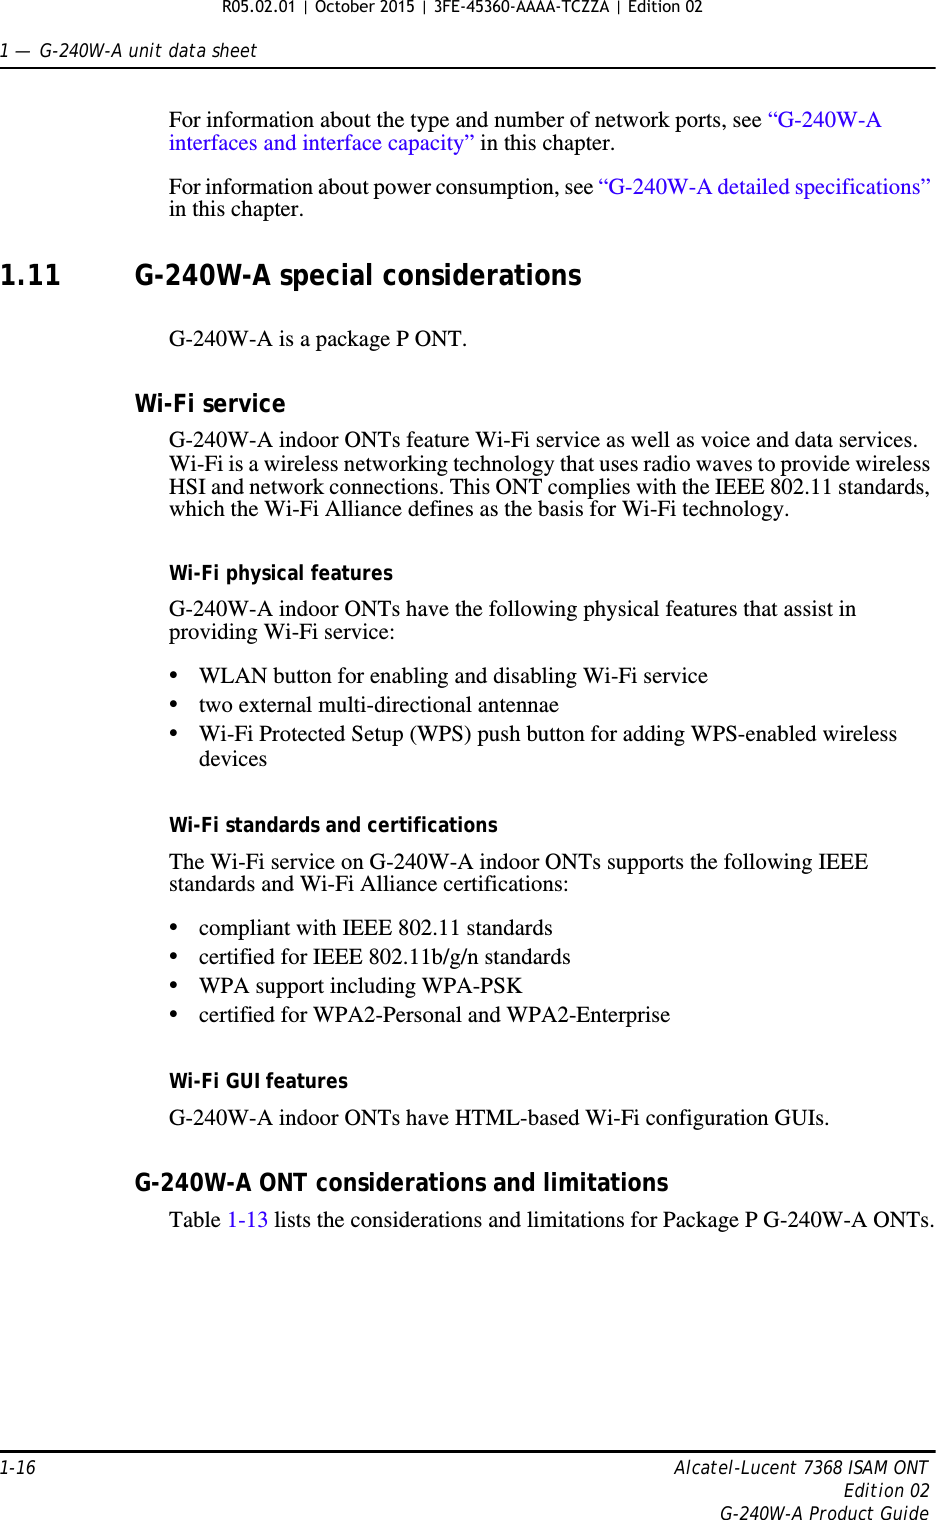 1 —  G-240W-A unit data sheet1-16 Alcatel-Lucent 7368 ISAM ONTEdition 02G-240W-A Product GuideFor information about the type and number of network ports, see “G-240W-A interfaces and interface capacity” in this chapter.For information about power consumption, see “G-240W-A detailed specifications” in this chapter.1.11 G-240W-A special considerationsG-240W-A is a package P ONT.Wi-Fi serviceG-240W-A indoor ONTs feature Wi-Fi service as well as voice and data services. Wi-Fi is a wireless networking technology that uses radio waves to provide wireless HSI and network connections. This ONT complies with the IEEE 802.11 standards, which the Wi-Fi Alliance defines as the basis for Wi-Fi technology. Wi-Fi physical featuresG-240W-A indoor ONTs have the following physical features that assist in providing Wi-Fi service: •WLAN button for enabling and disabling Wi-Fi service •two external multi-directional antennae •Wi-Fi Protected Setup (WPS) push button for adding WPS-enabled wireless devicesWi-Fi standards and certificationsThe Wi-Fi service on G-240W-A indoor ONTs supports the following IEEE standards and Wi-Fi Alliance certifications:•compliant with IEEE 802.11 standards•certified for IEEE 802.11b/g/n standards •WPA support including WPA-PSK•certified for WPA2-Personal and WPA2-EnterpriseWi-Fi GUI featuresG-240W-A indoor ONTs have HTML-based Wi-Fi configuration GUIs. G-240W-A ONT considerations and limitationsTable 1-13 lists the considerations and limitations for Package P G-240W-A ONTs. R05.02.01 | October 2015 | 3FE-45360-AAAA-TCZZA | Edition 02 